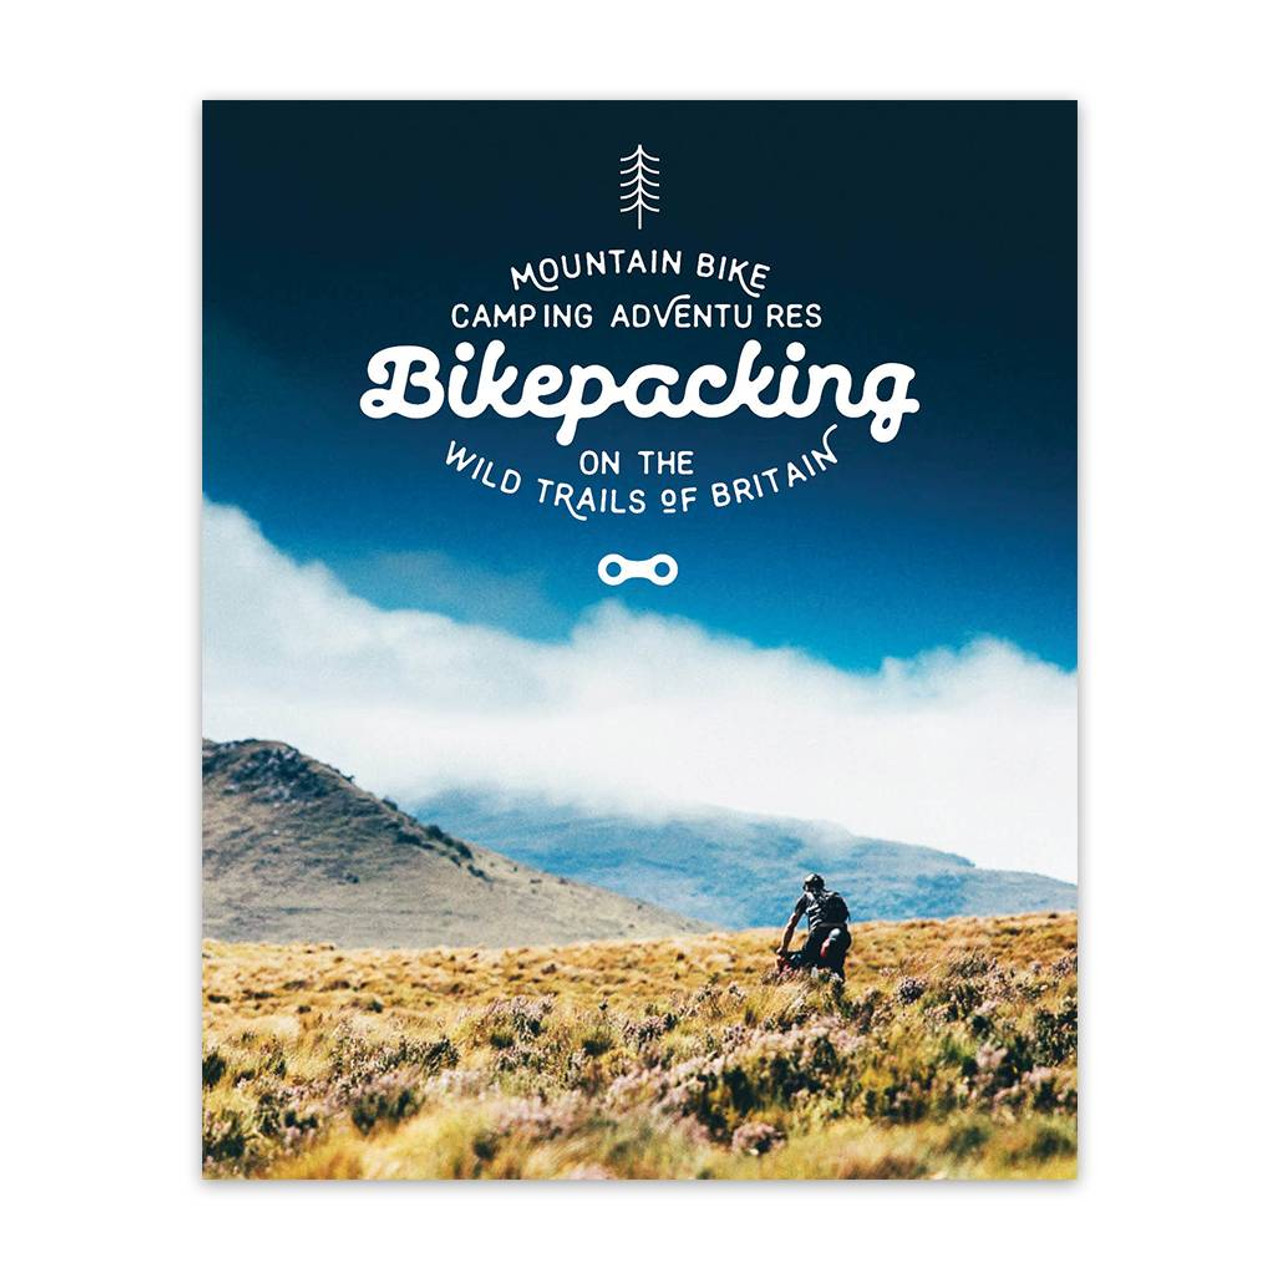 Bikepacking: Mountain Bike Camping Adventures On The Wild Trails Of Britain